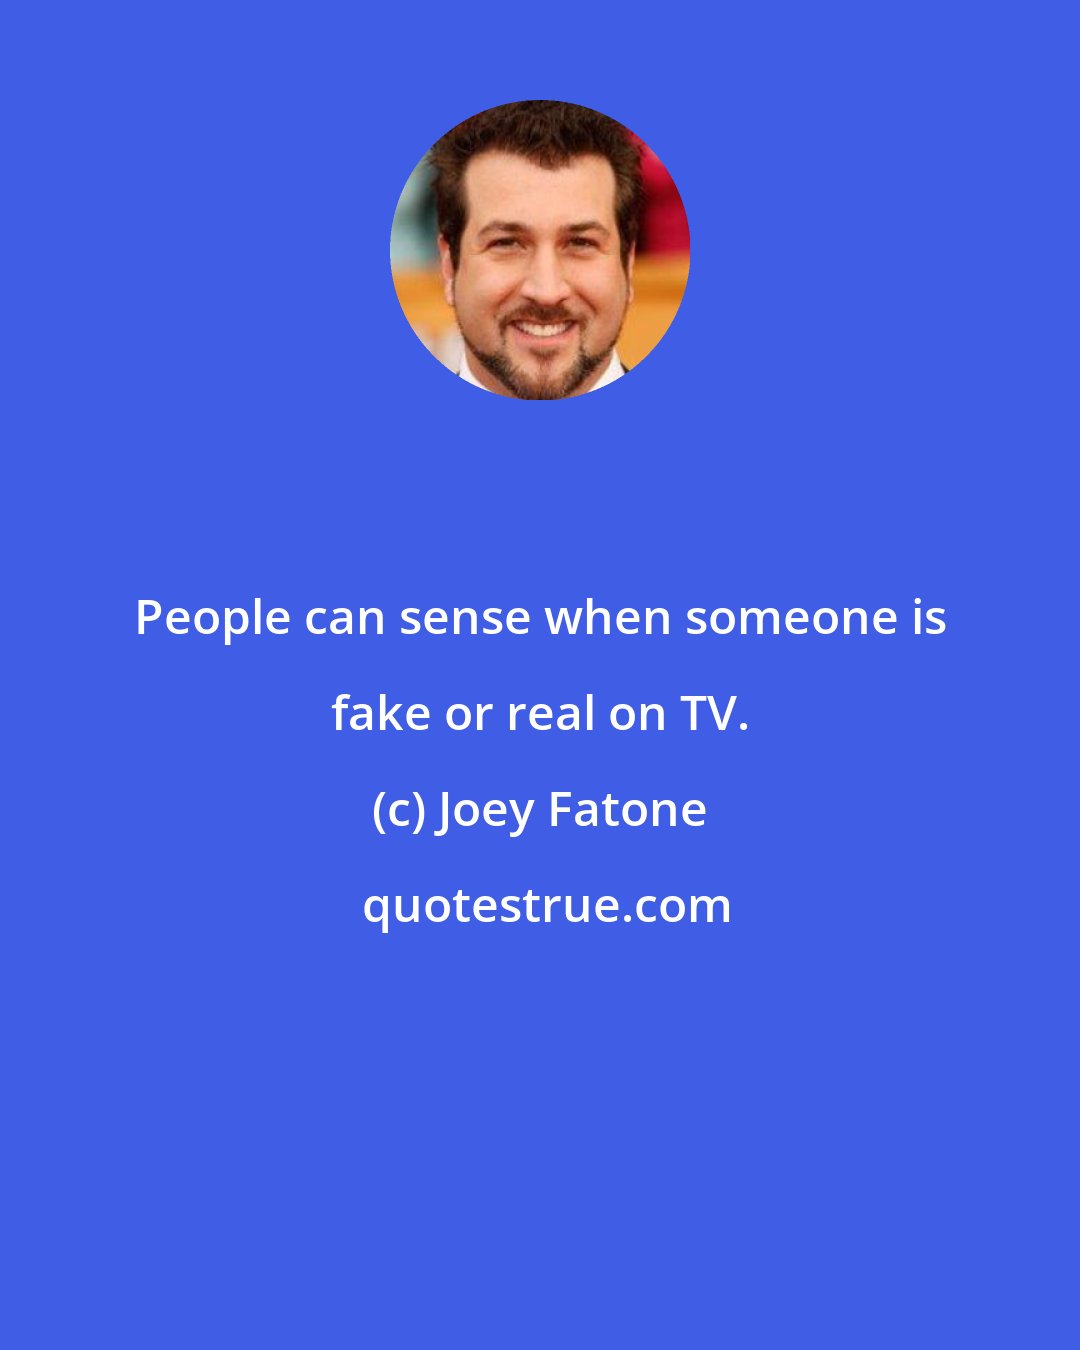 Joey Fatone: People can sense when someone is fake or real on TV.